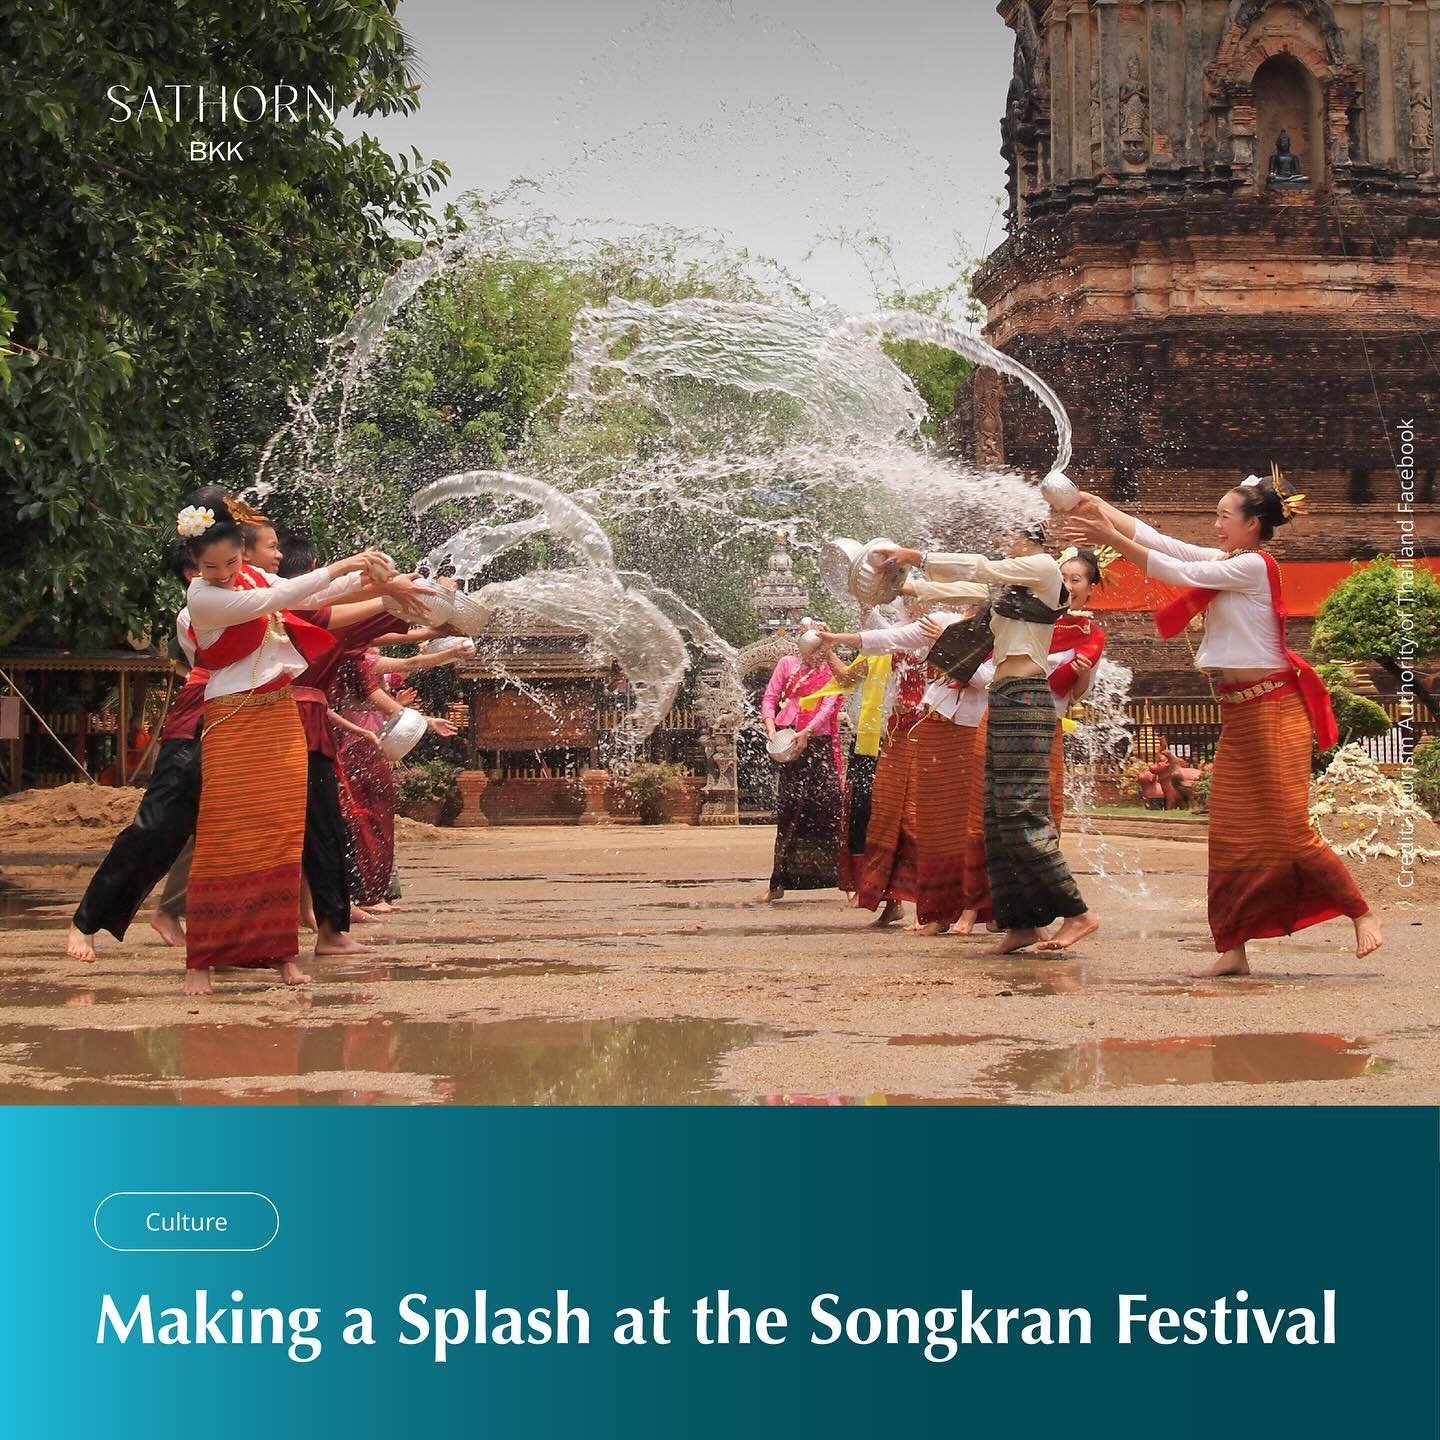 The prismatic cultural setting of Thailand&rsquo;s New Year Festival, Songkran, spanning ancient rituals of renewal to a globally-renowned water festival, also creates a no-less-diverse array of opportunities for brands and businesses.

Find out more